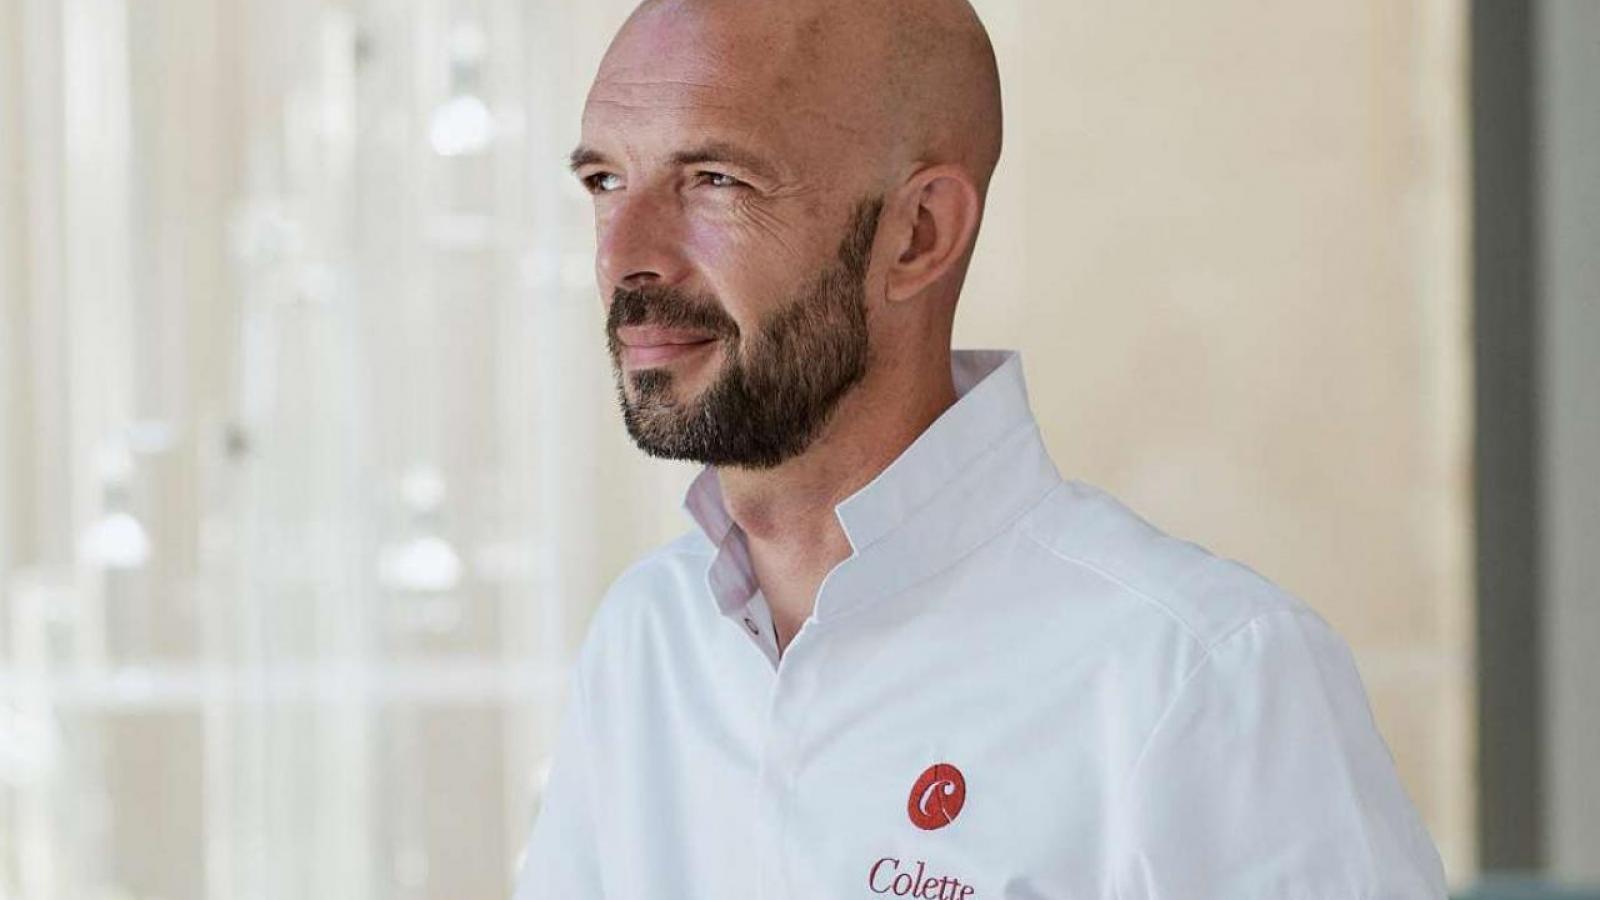 Meet our Michelin-starred chef, Philippe Colinet